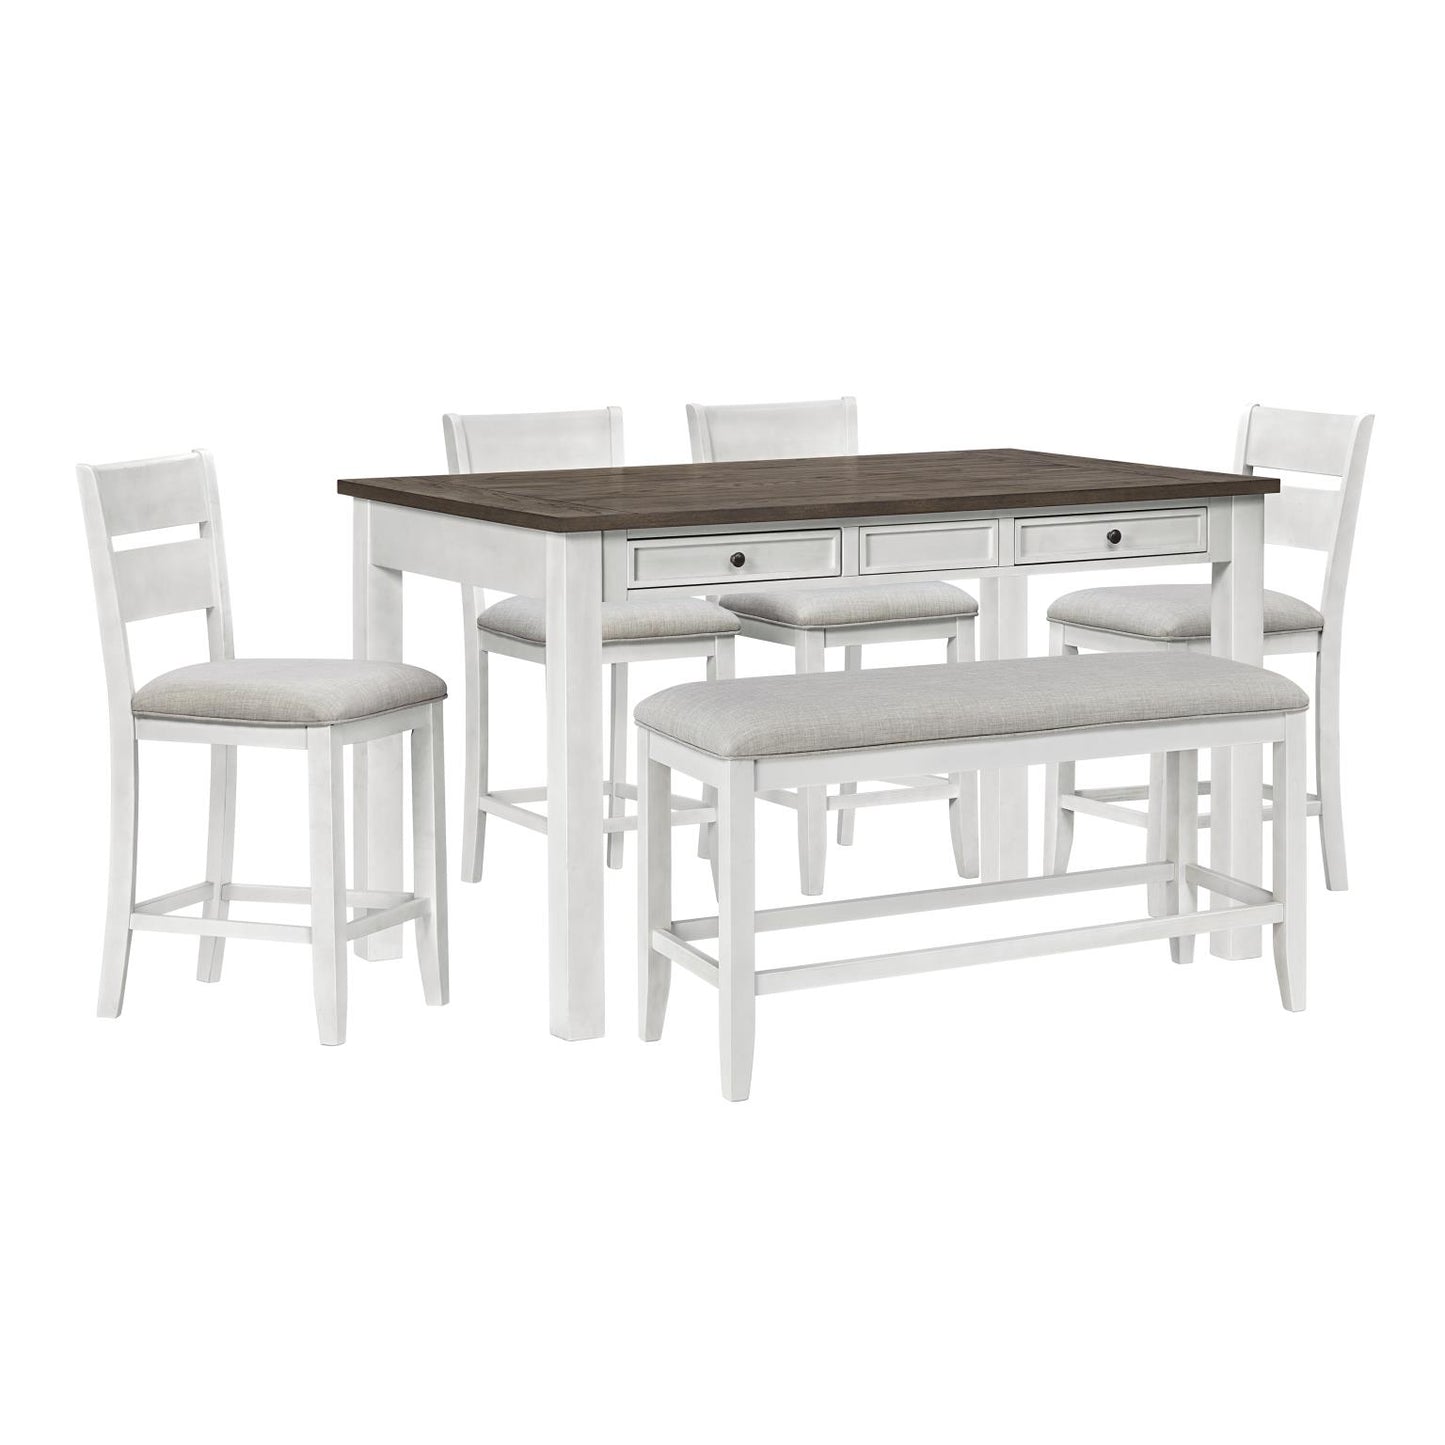 Kyle Light Counter Table, Counter Chairs & Bench